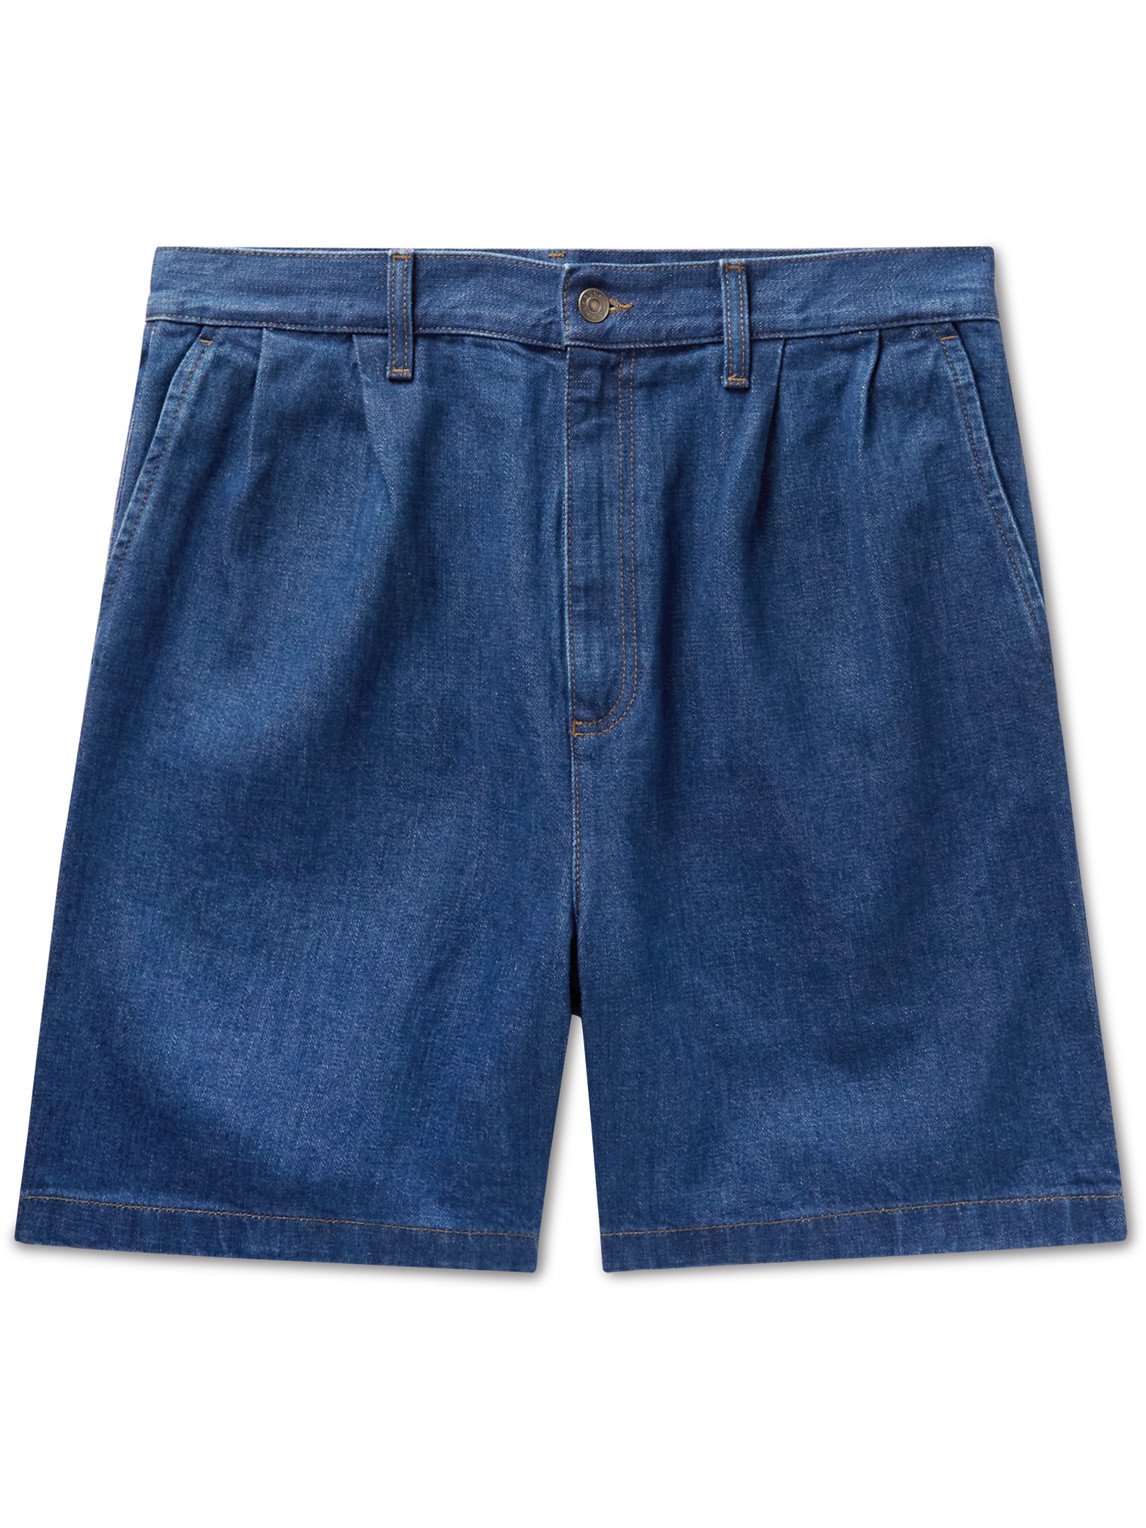 GUCCI STRAIGHT-LEG PLEATED EMBROIDERED DENIM SHORTS